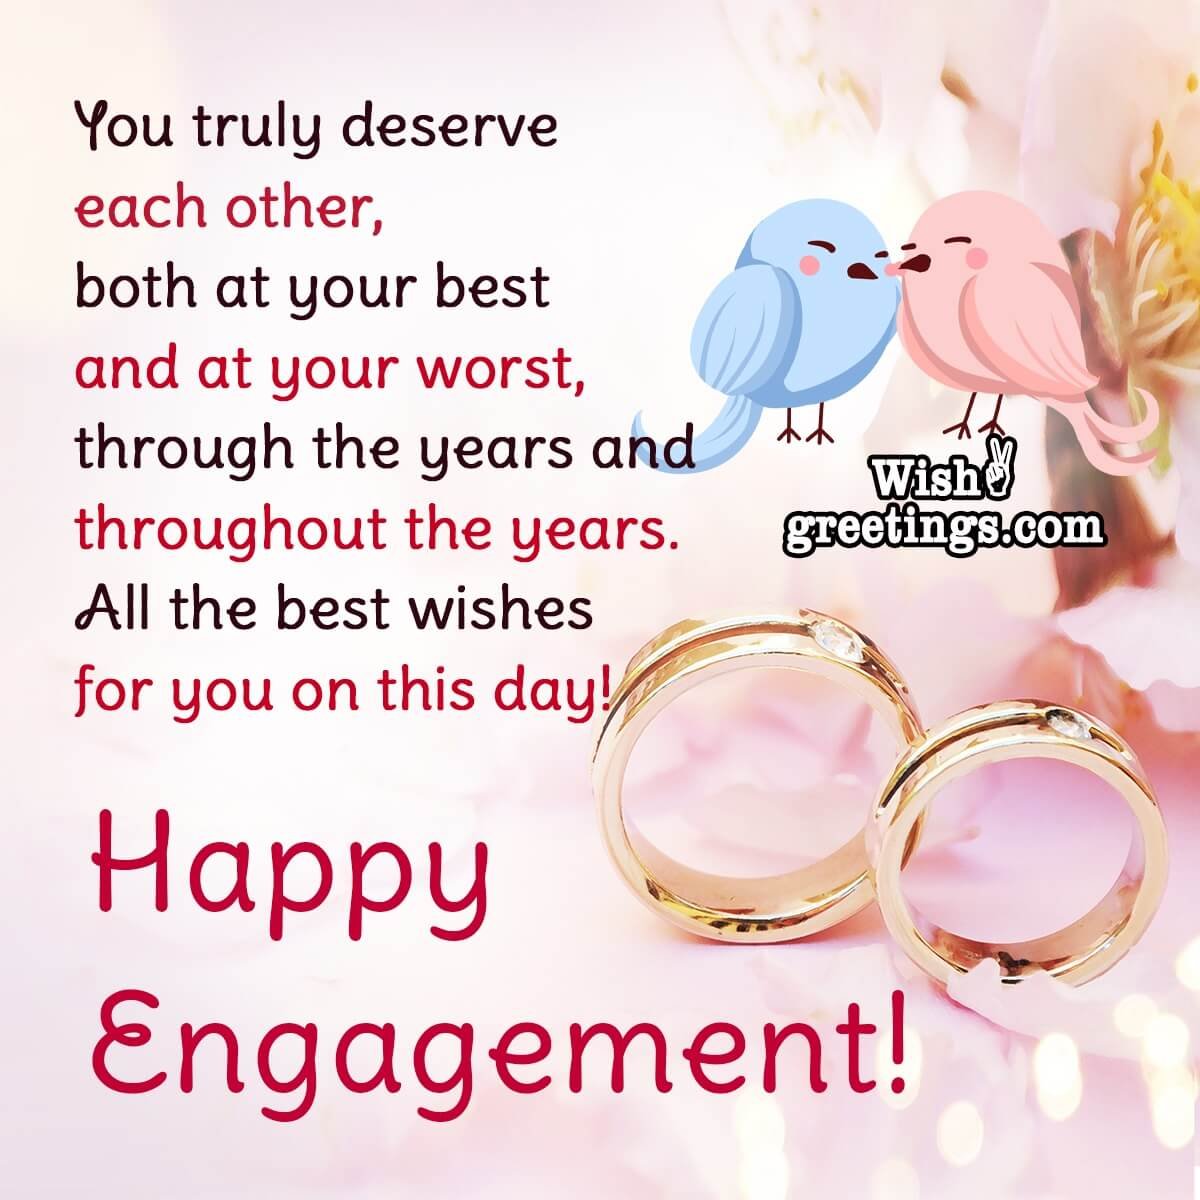 Happy Engagement Messages - Wish Greetings